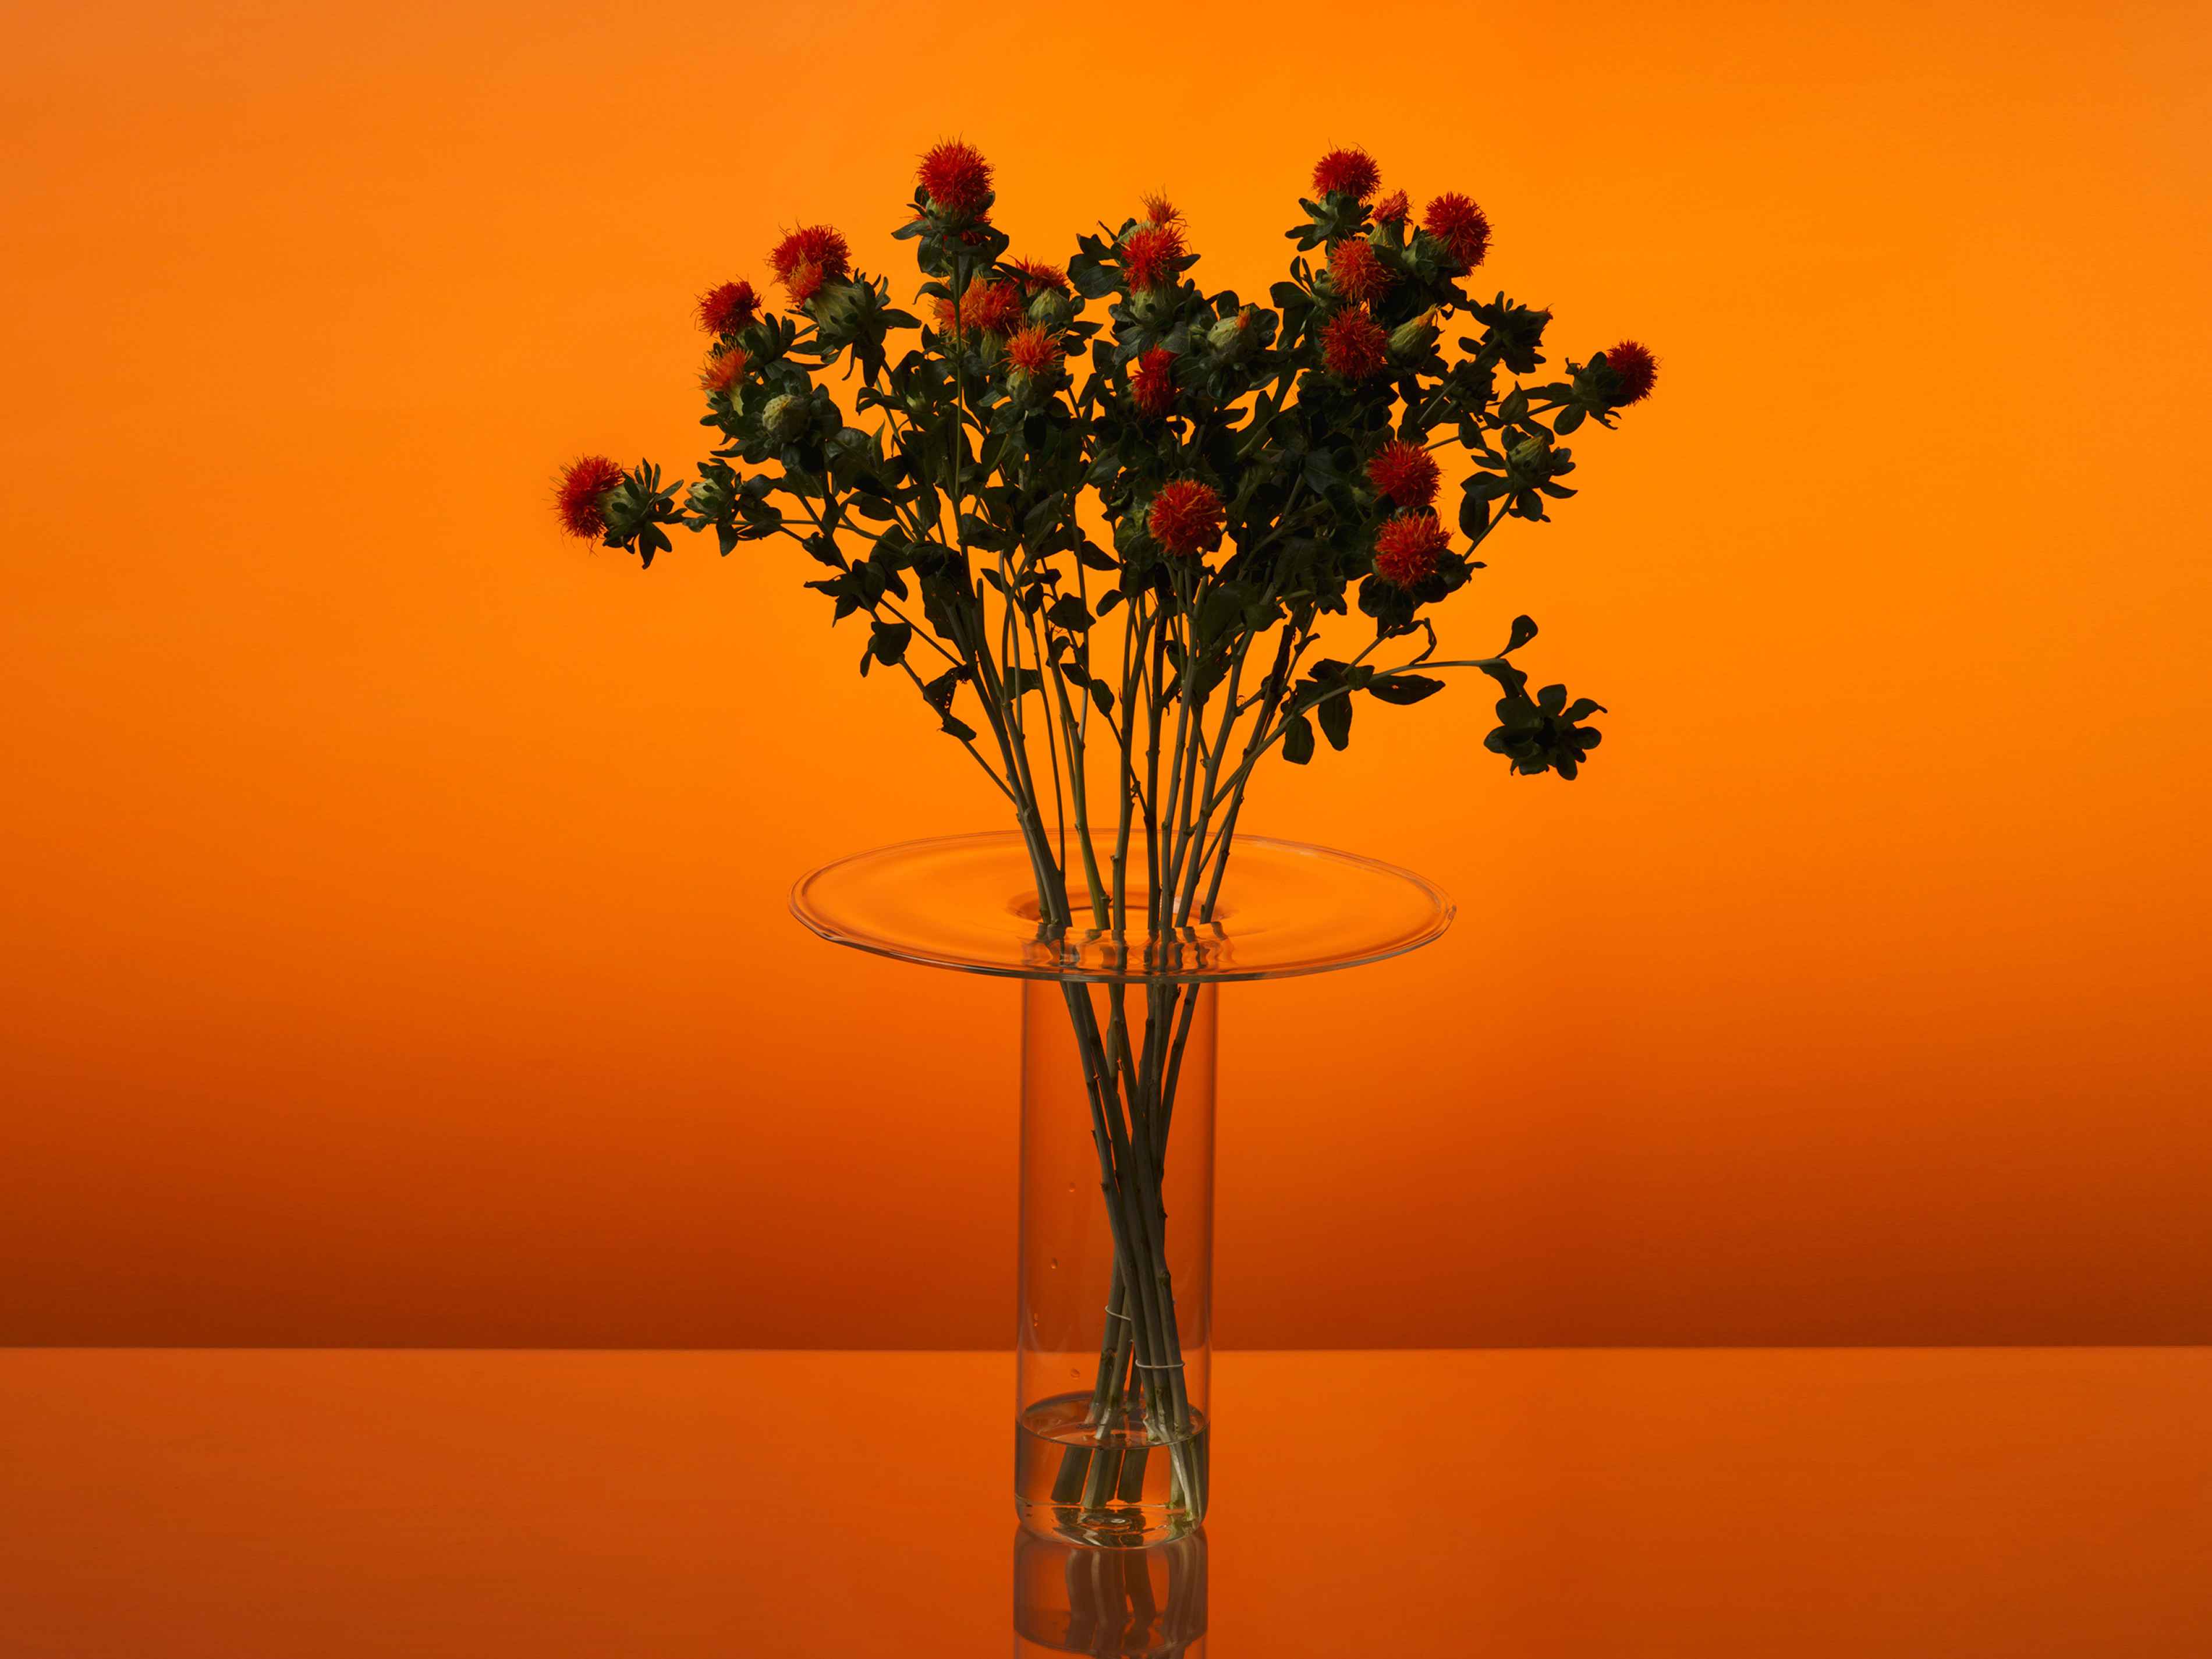 Glass vase with red flowers inside on an orange background